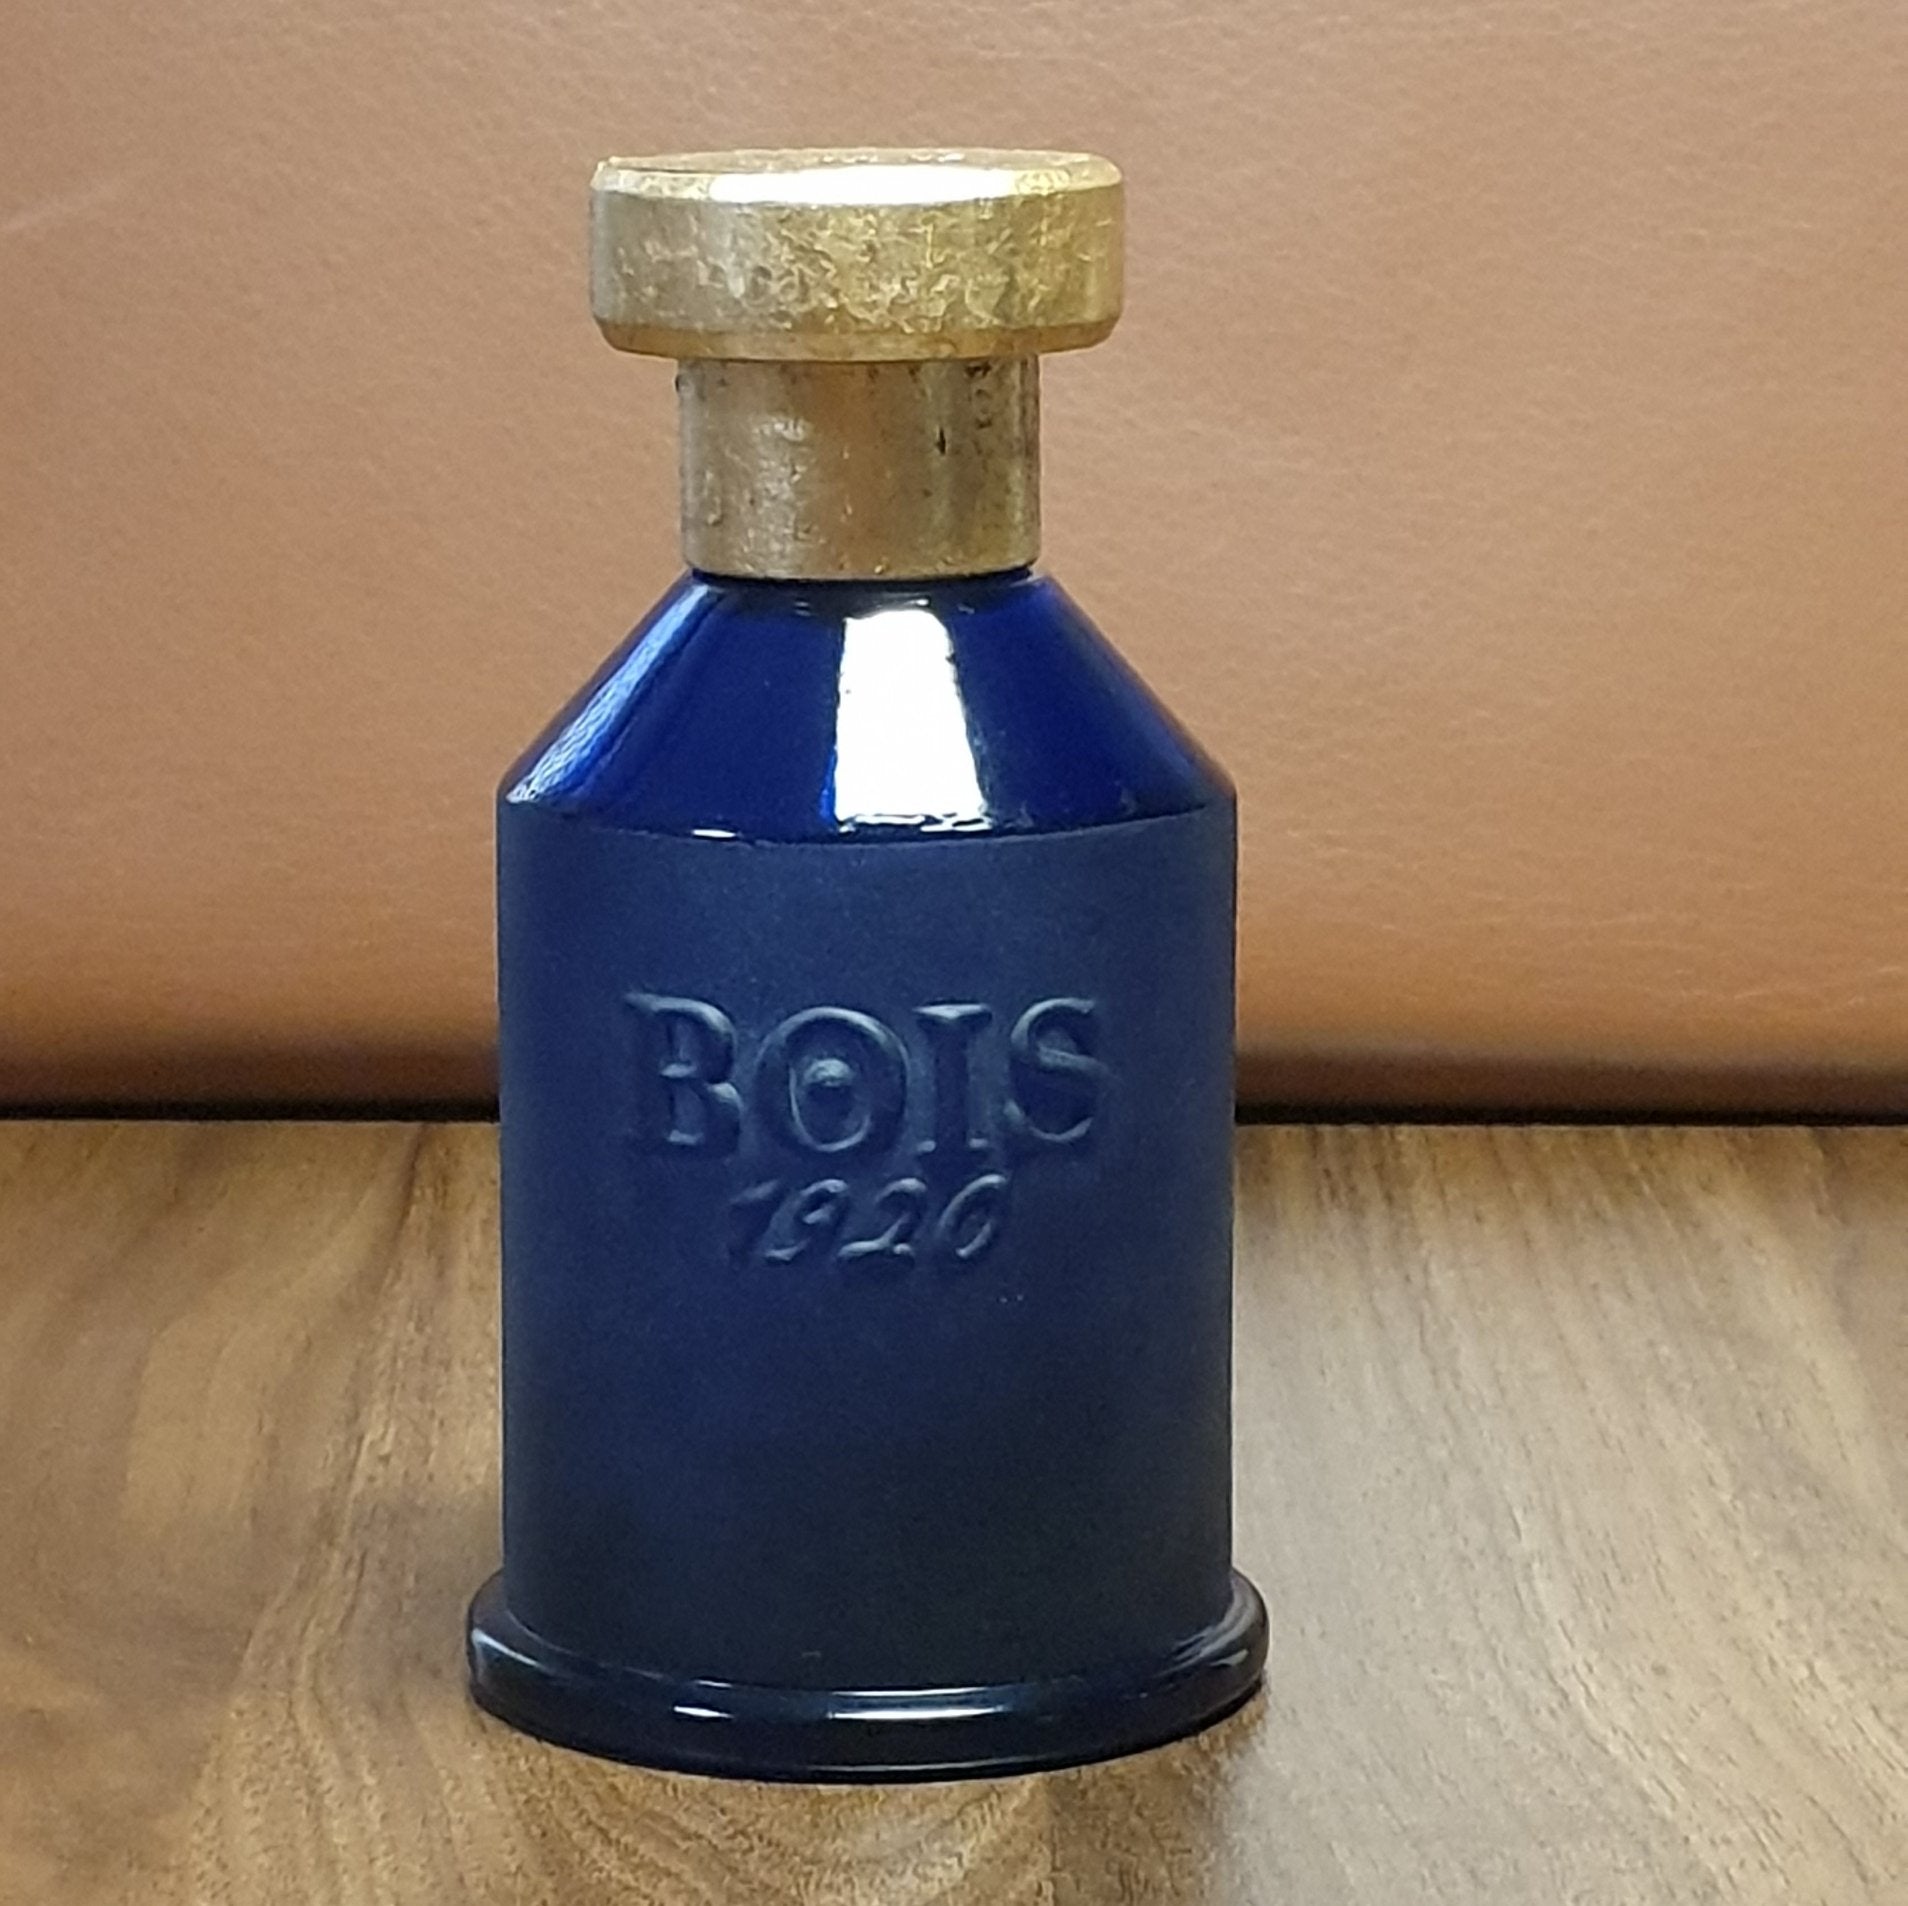 BOIS 1920 Oltremare (Decants)